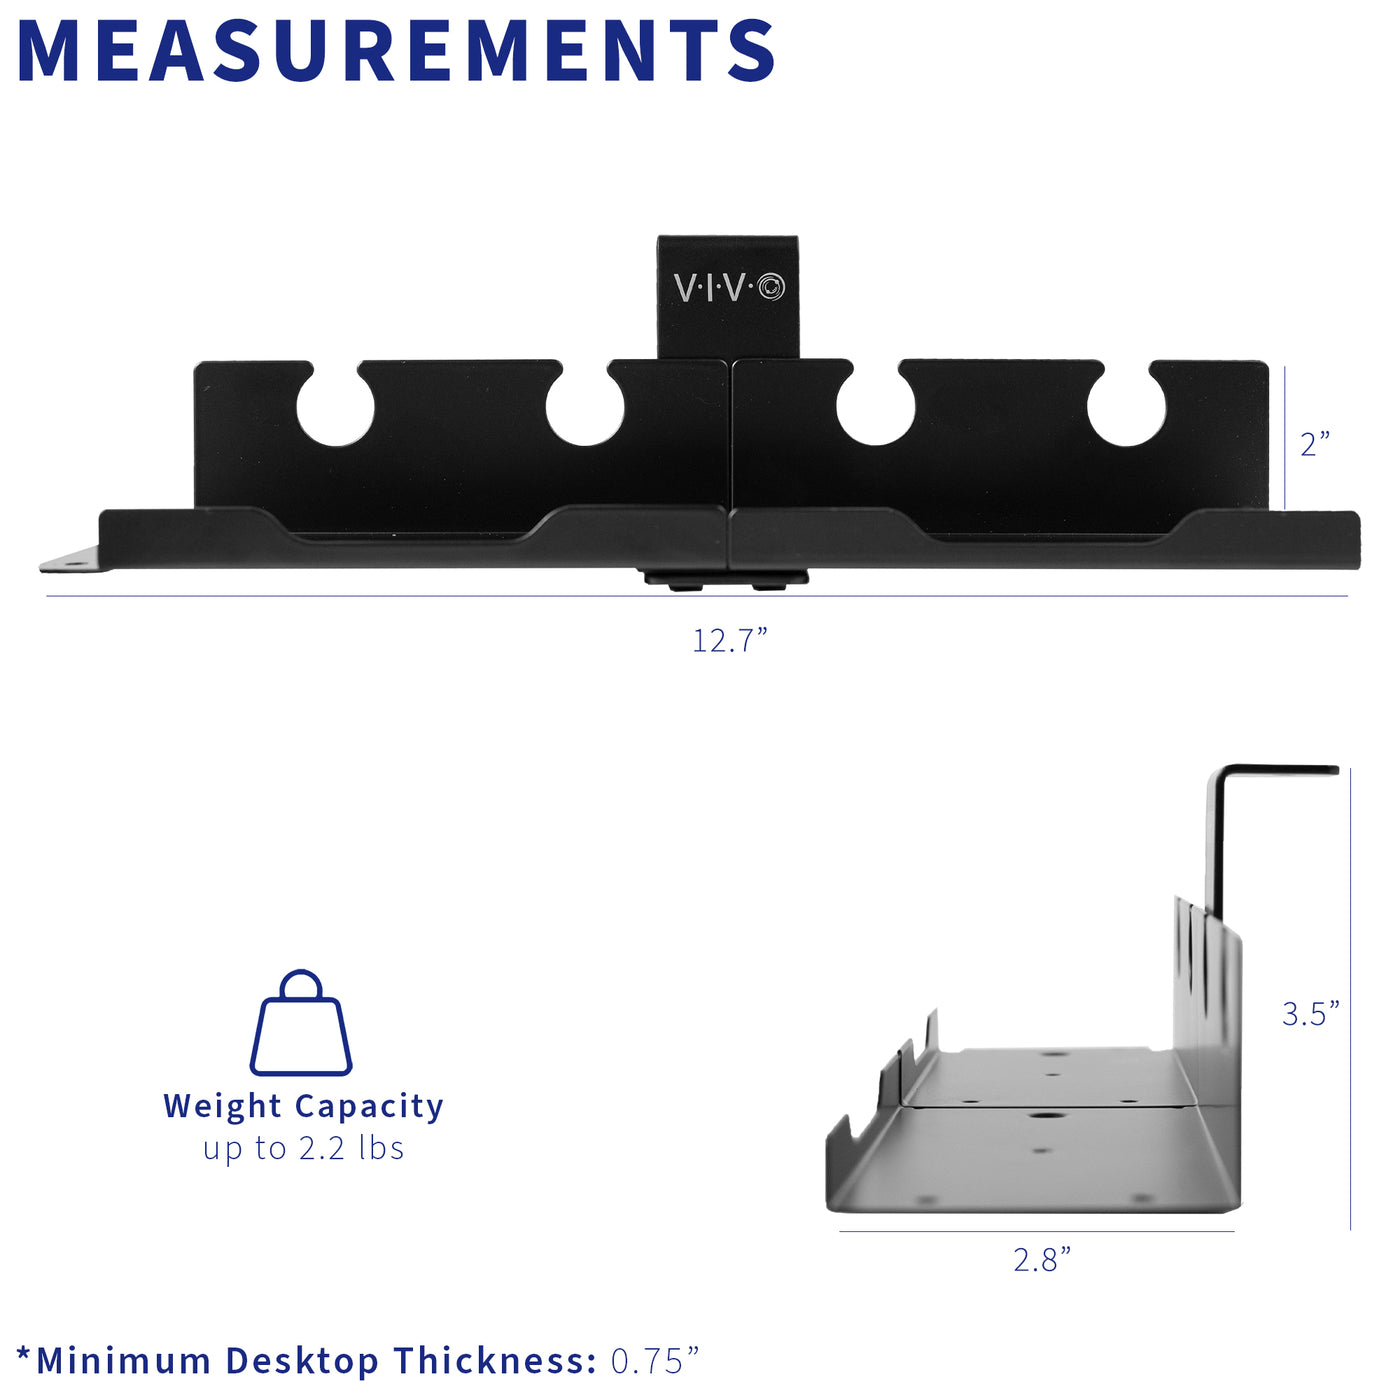 Measurements and specifications of cable management tray from VIVO.